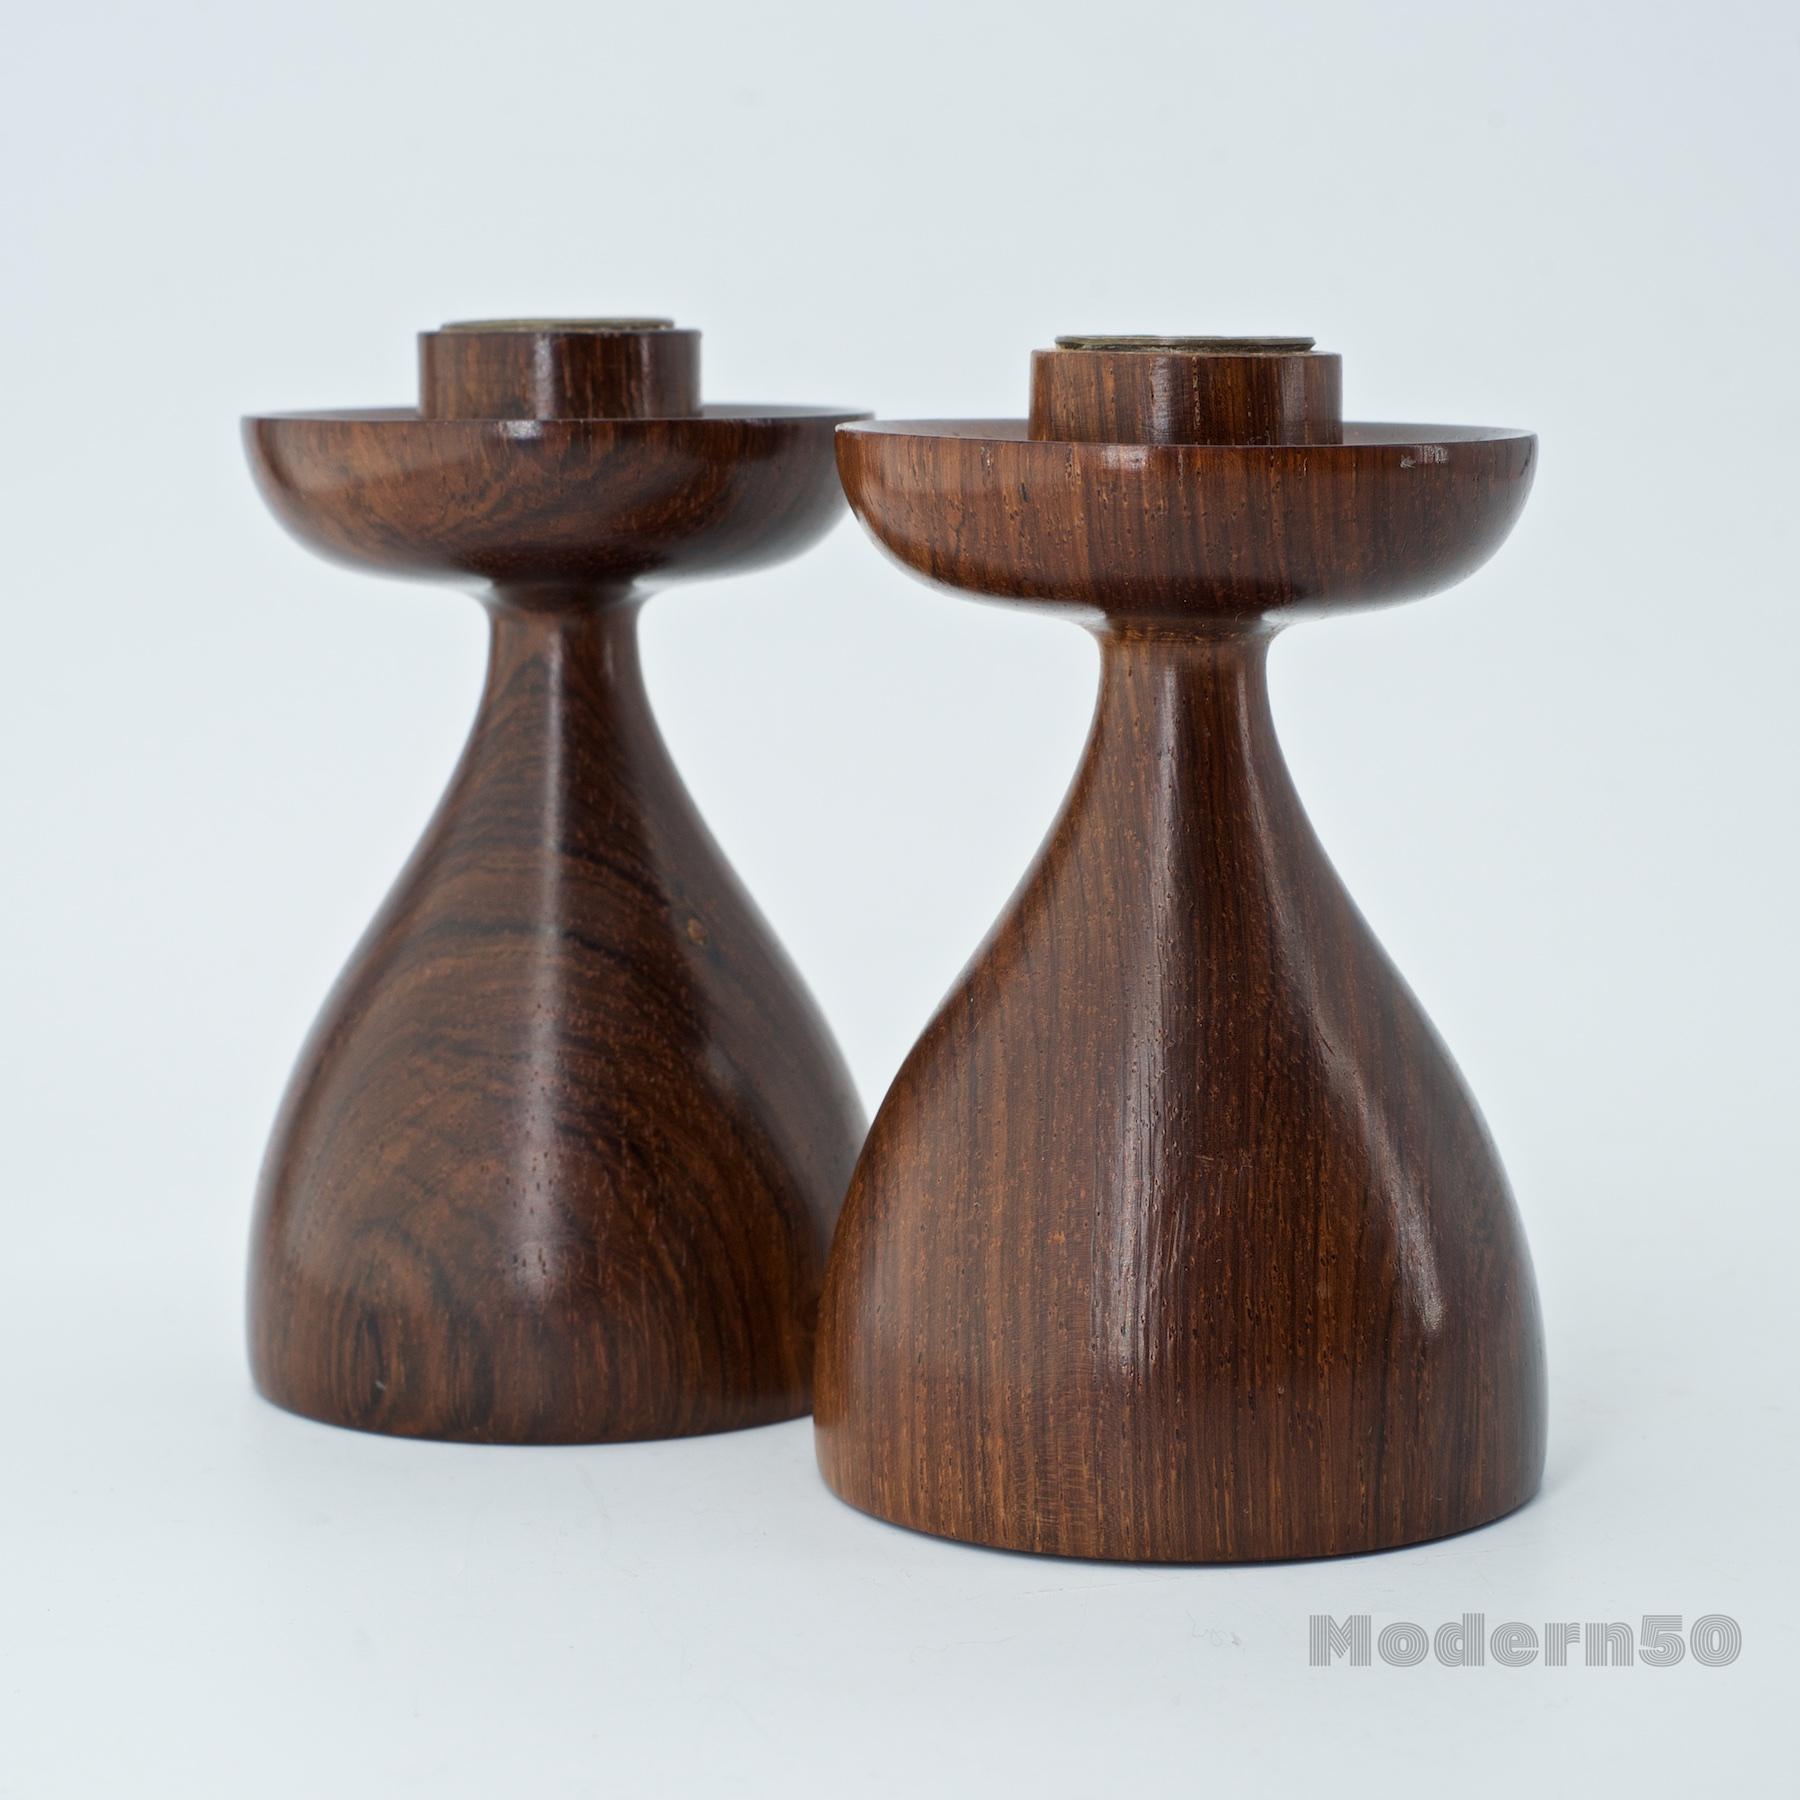 Wonderful South American turned wood candlestick holders.